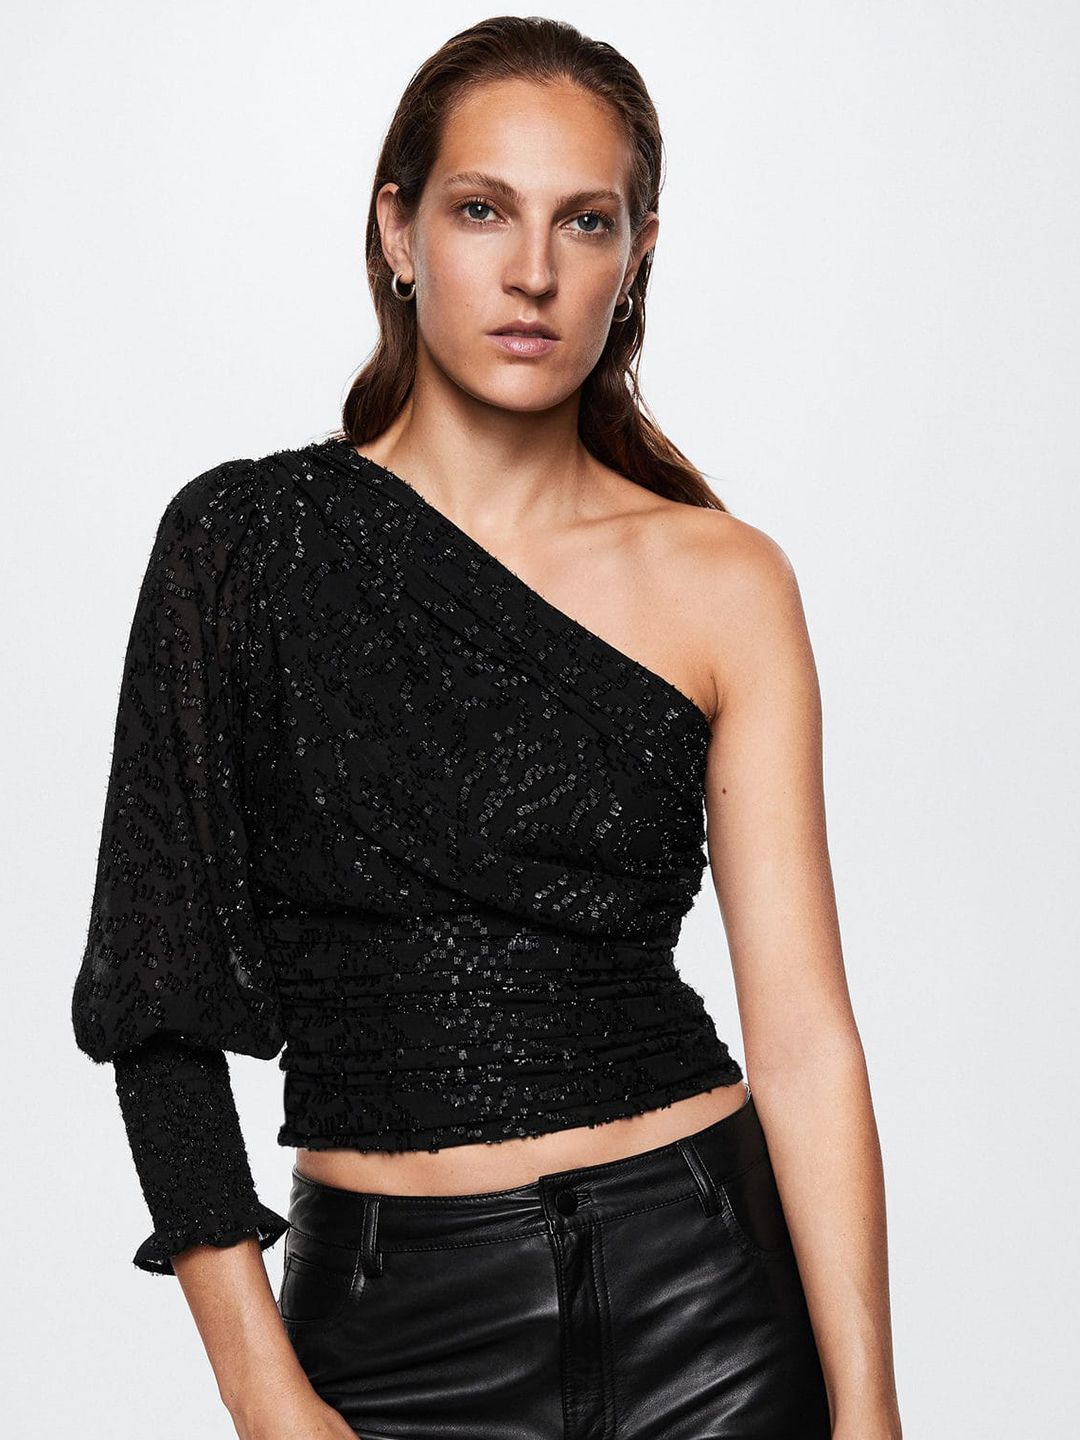 MANGO Sparkled One-Shoulder Blouson Crop Top Price in India